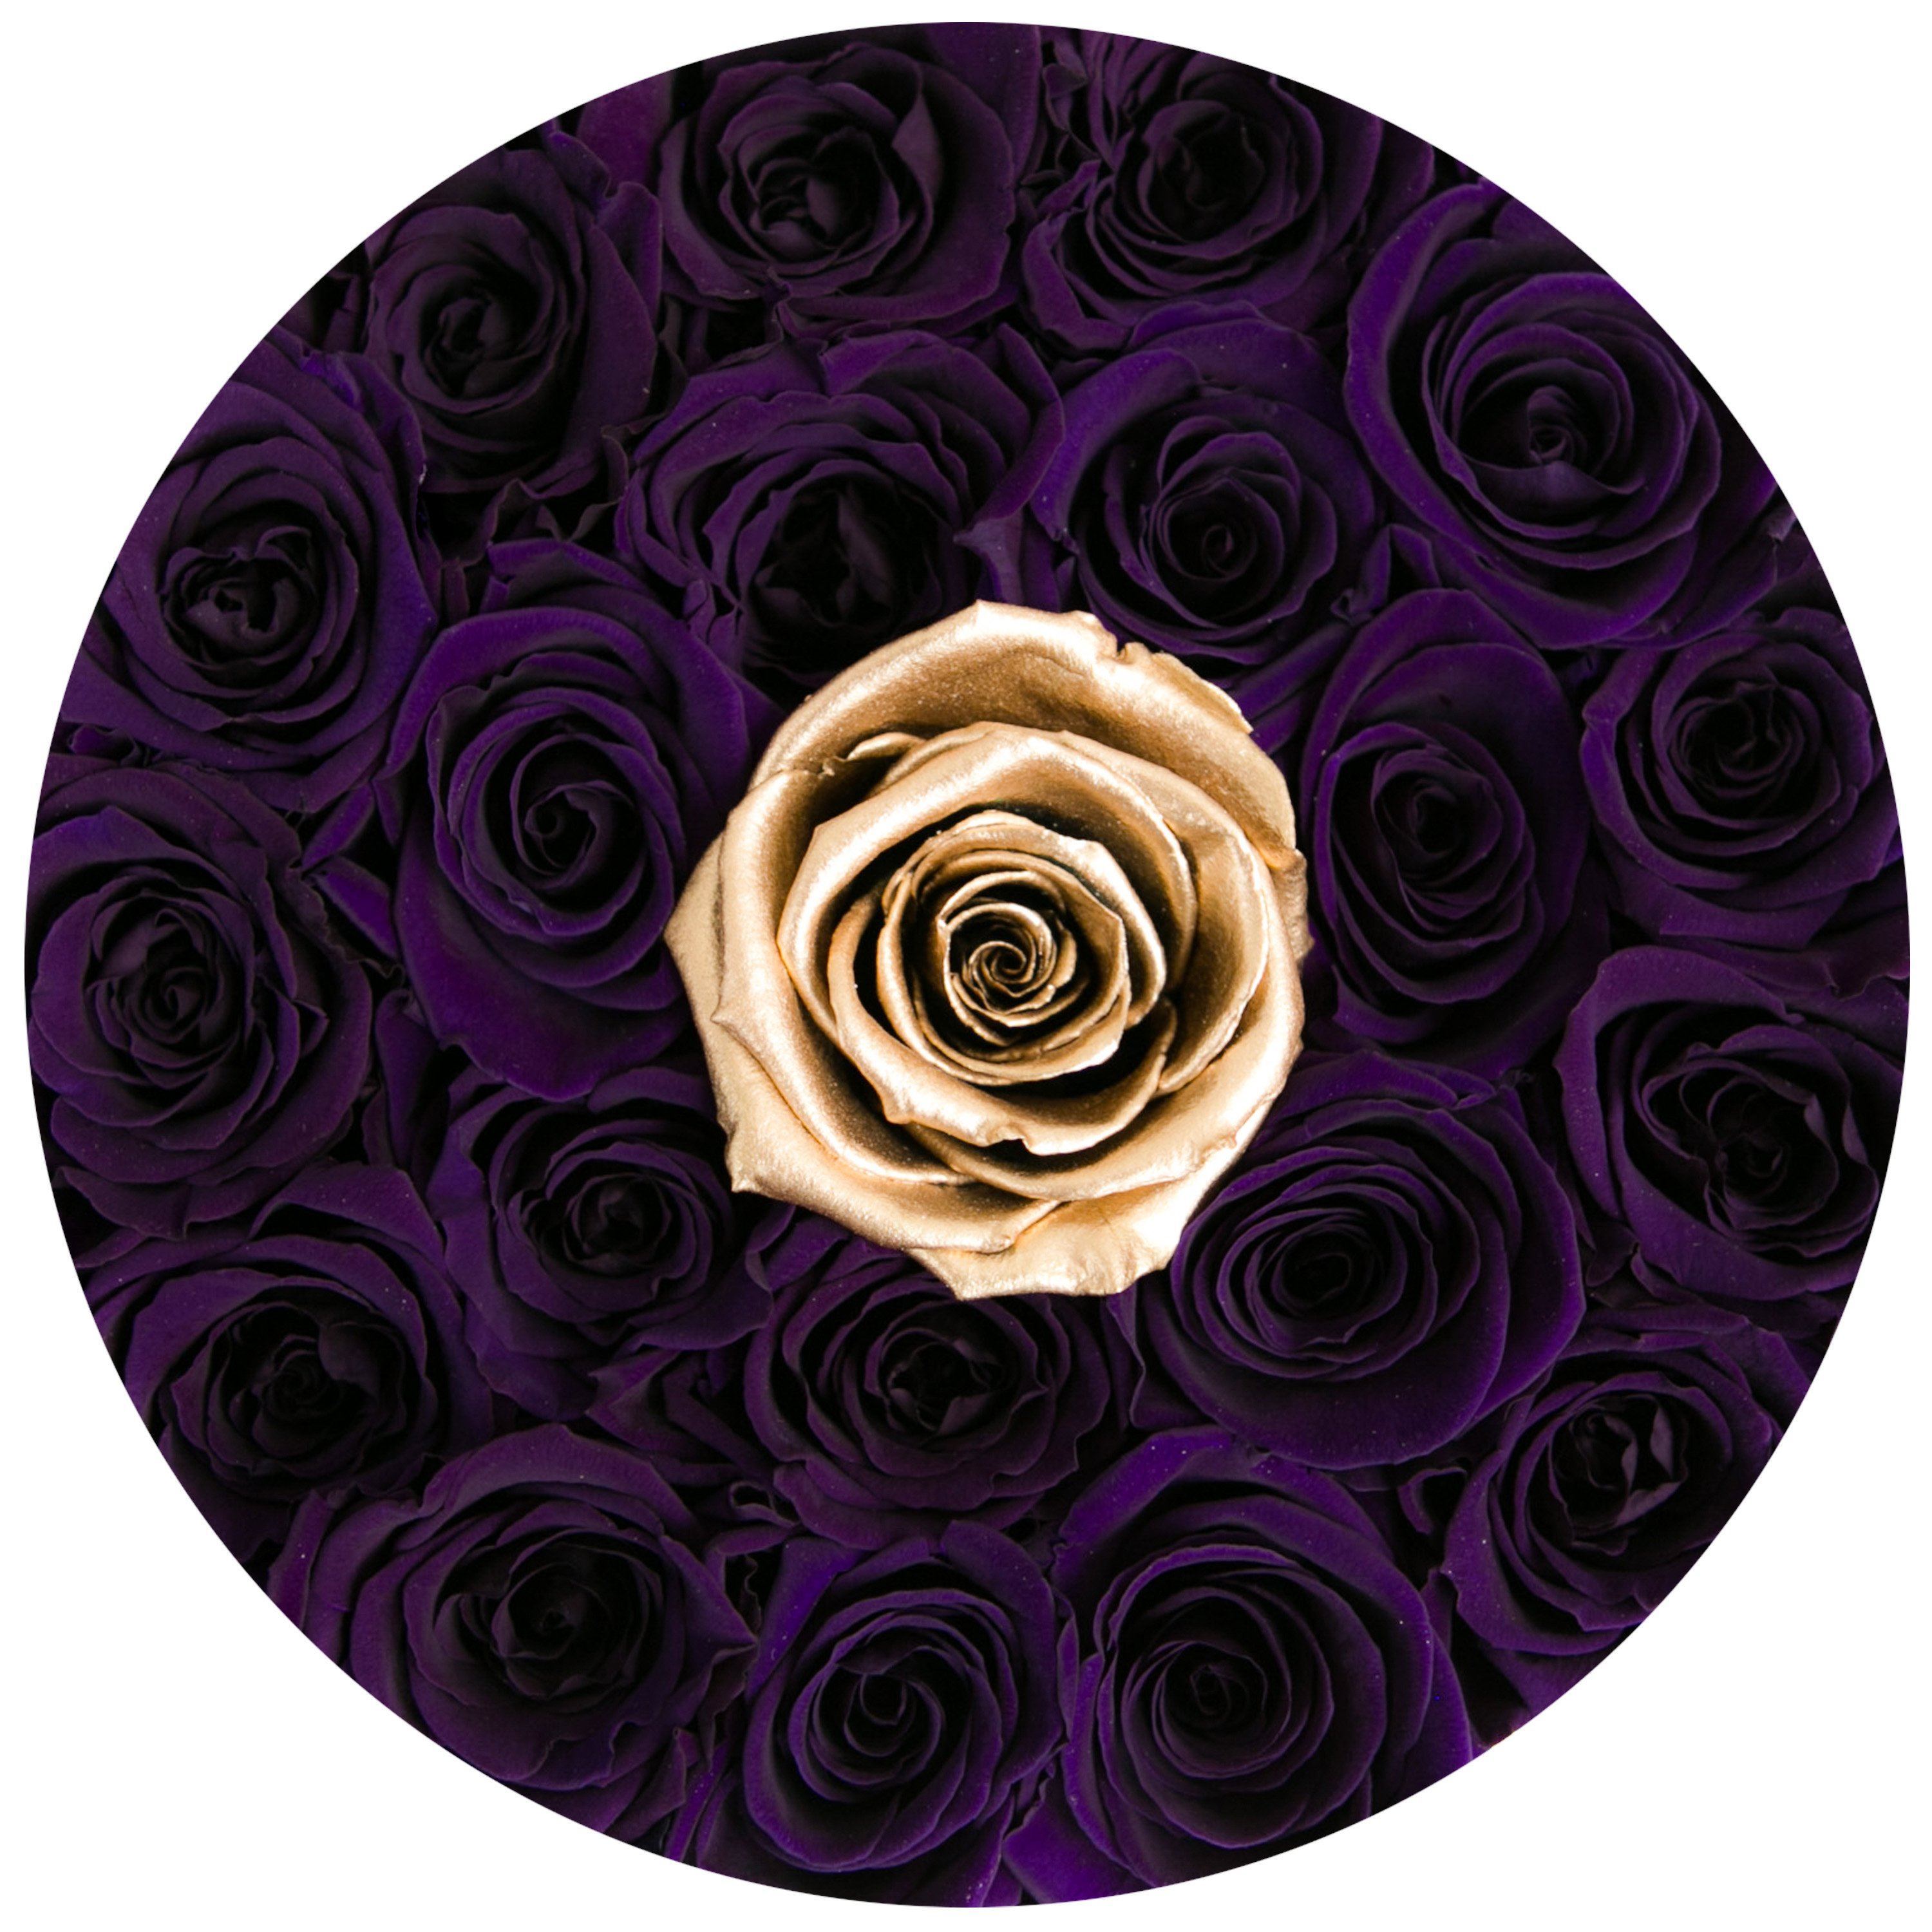 classic round box - Beast2 - Limited Edition mixed eternity roses - the million roses